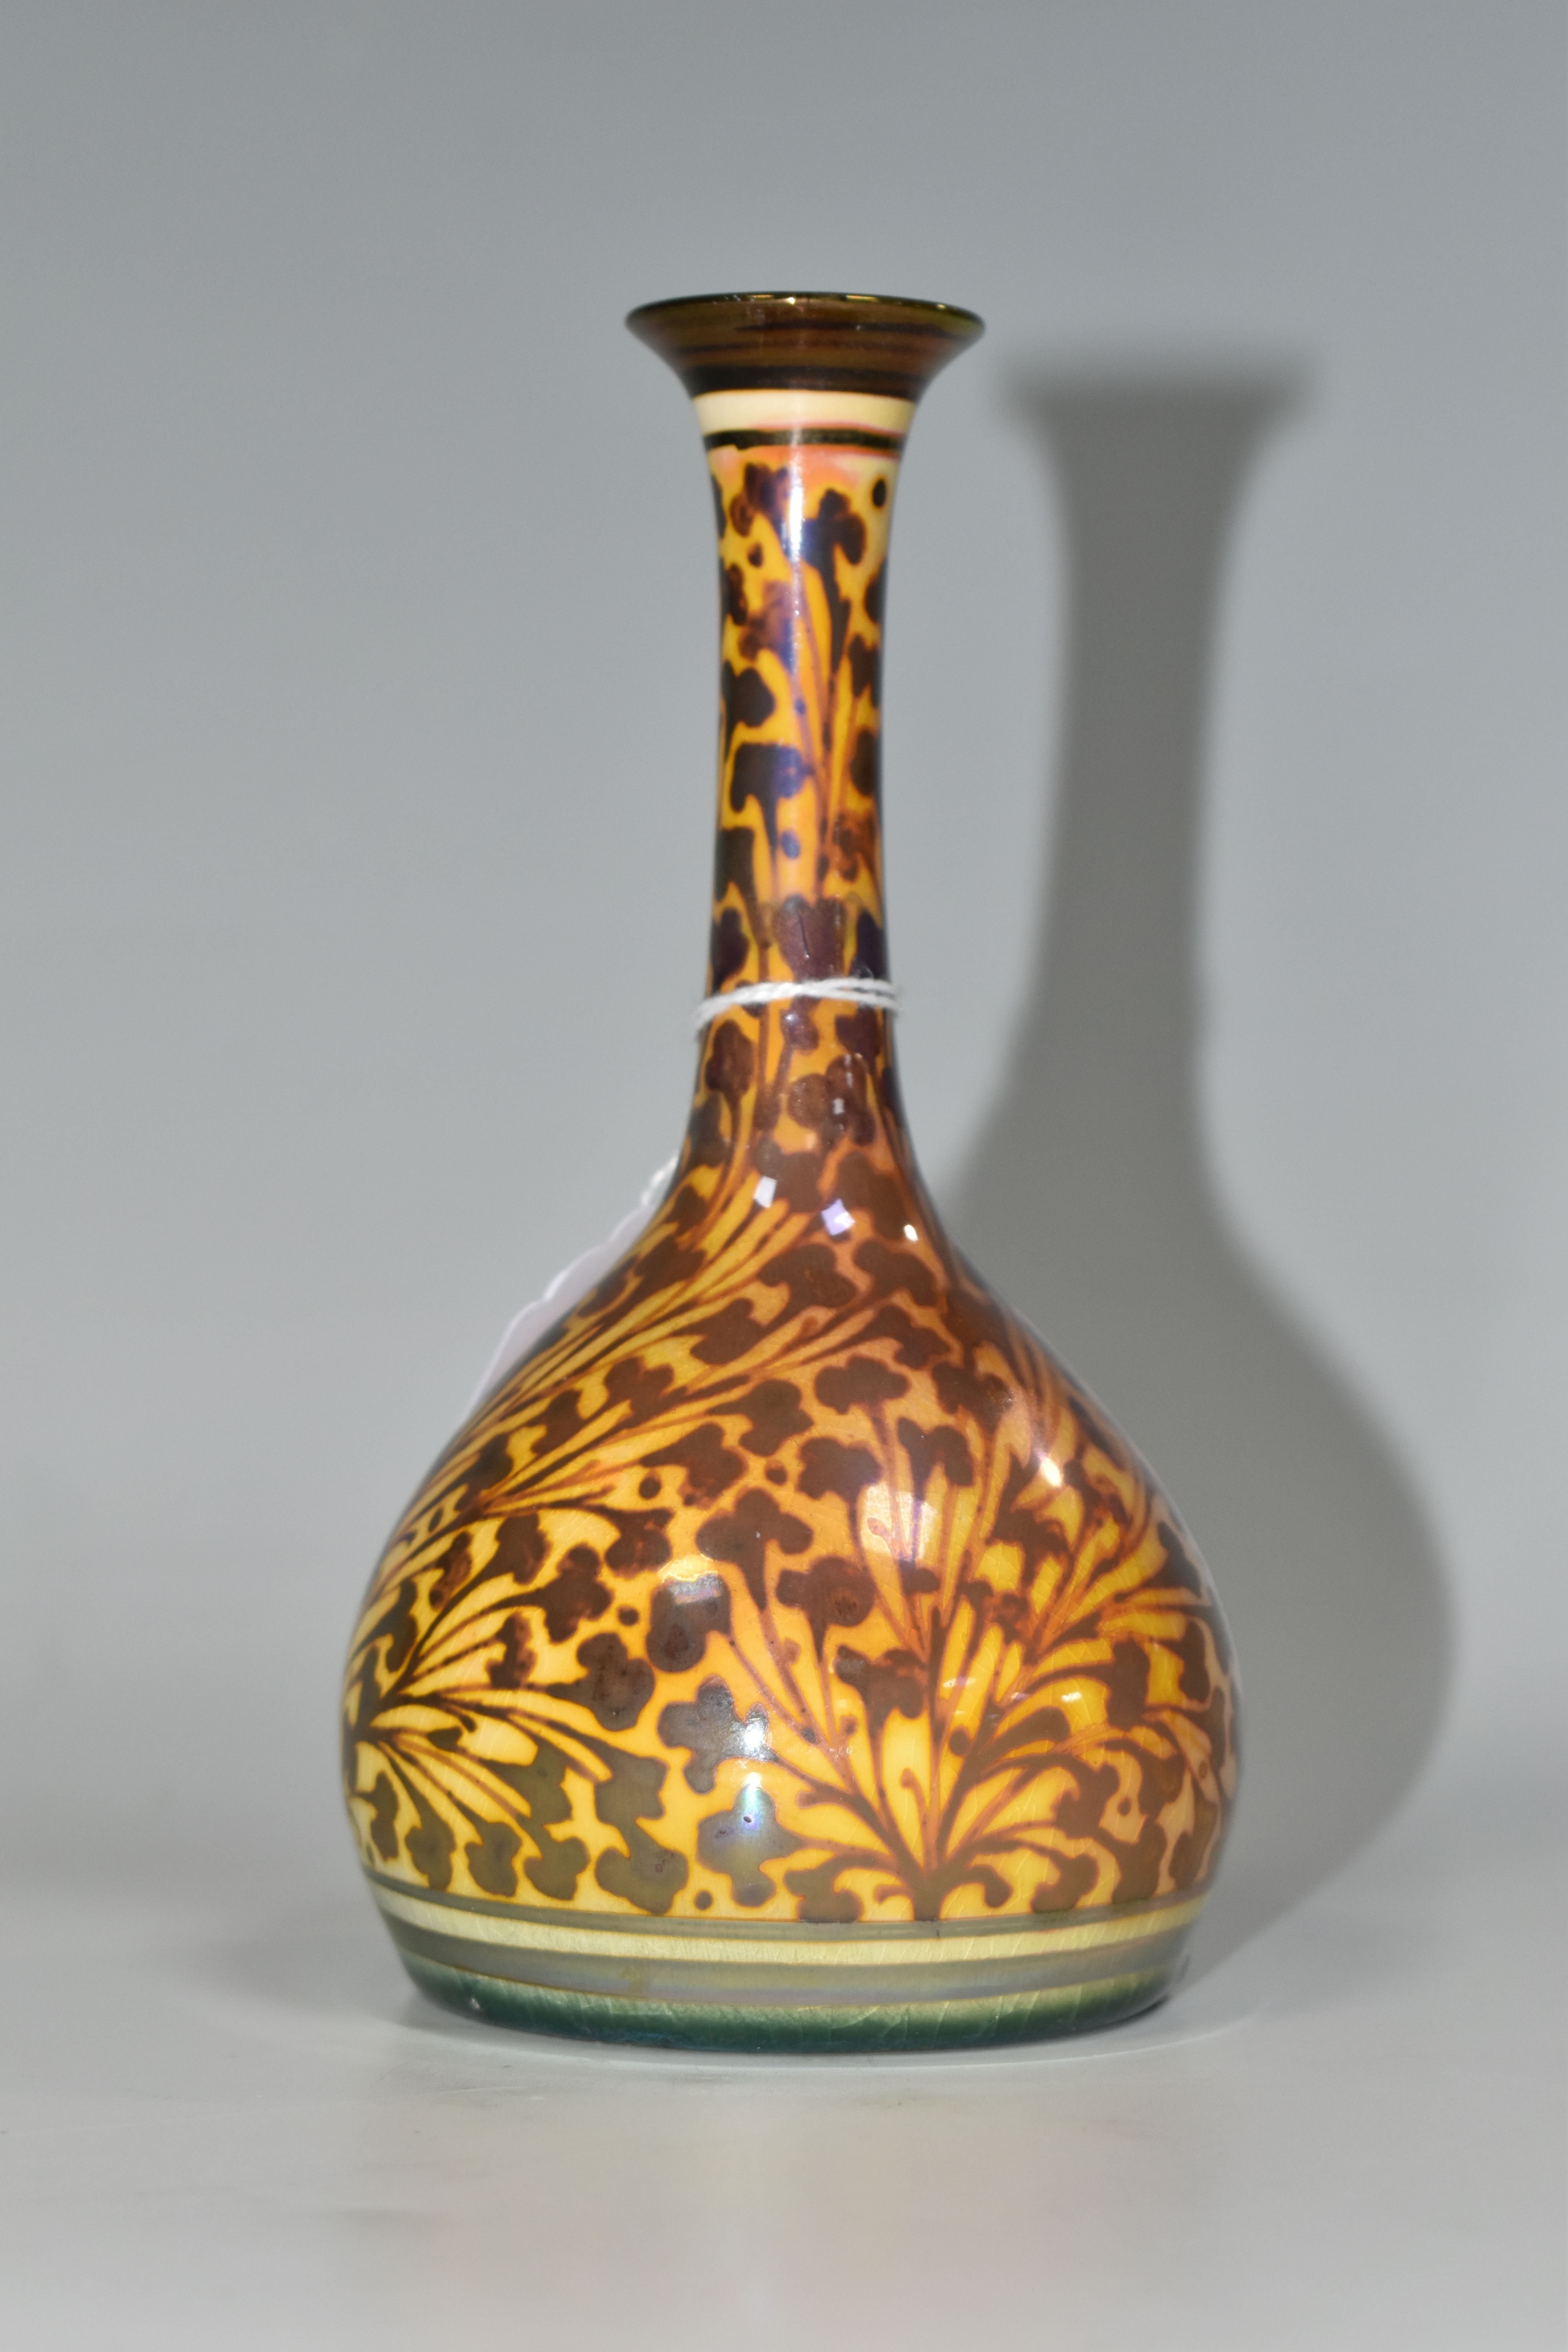 A PILKINGTON'S BUD VASE, with foliate decoration on a yellow ground, model no 2598, impressed P - Image 3 of 5